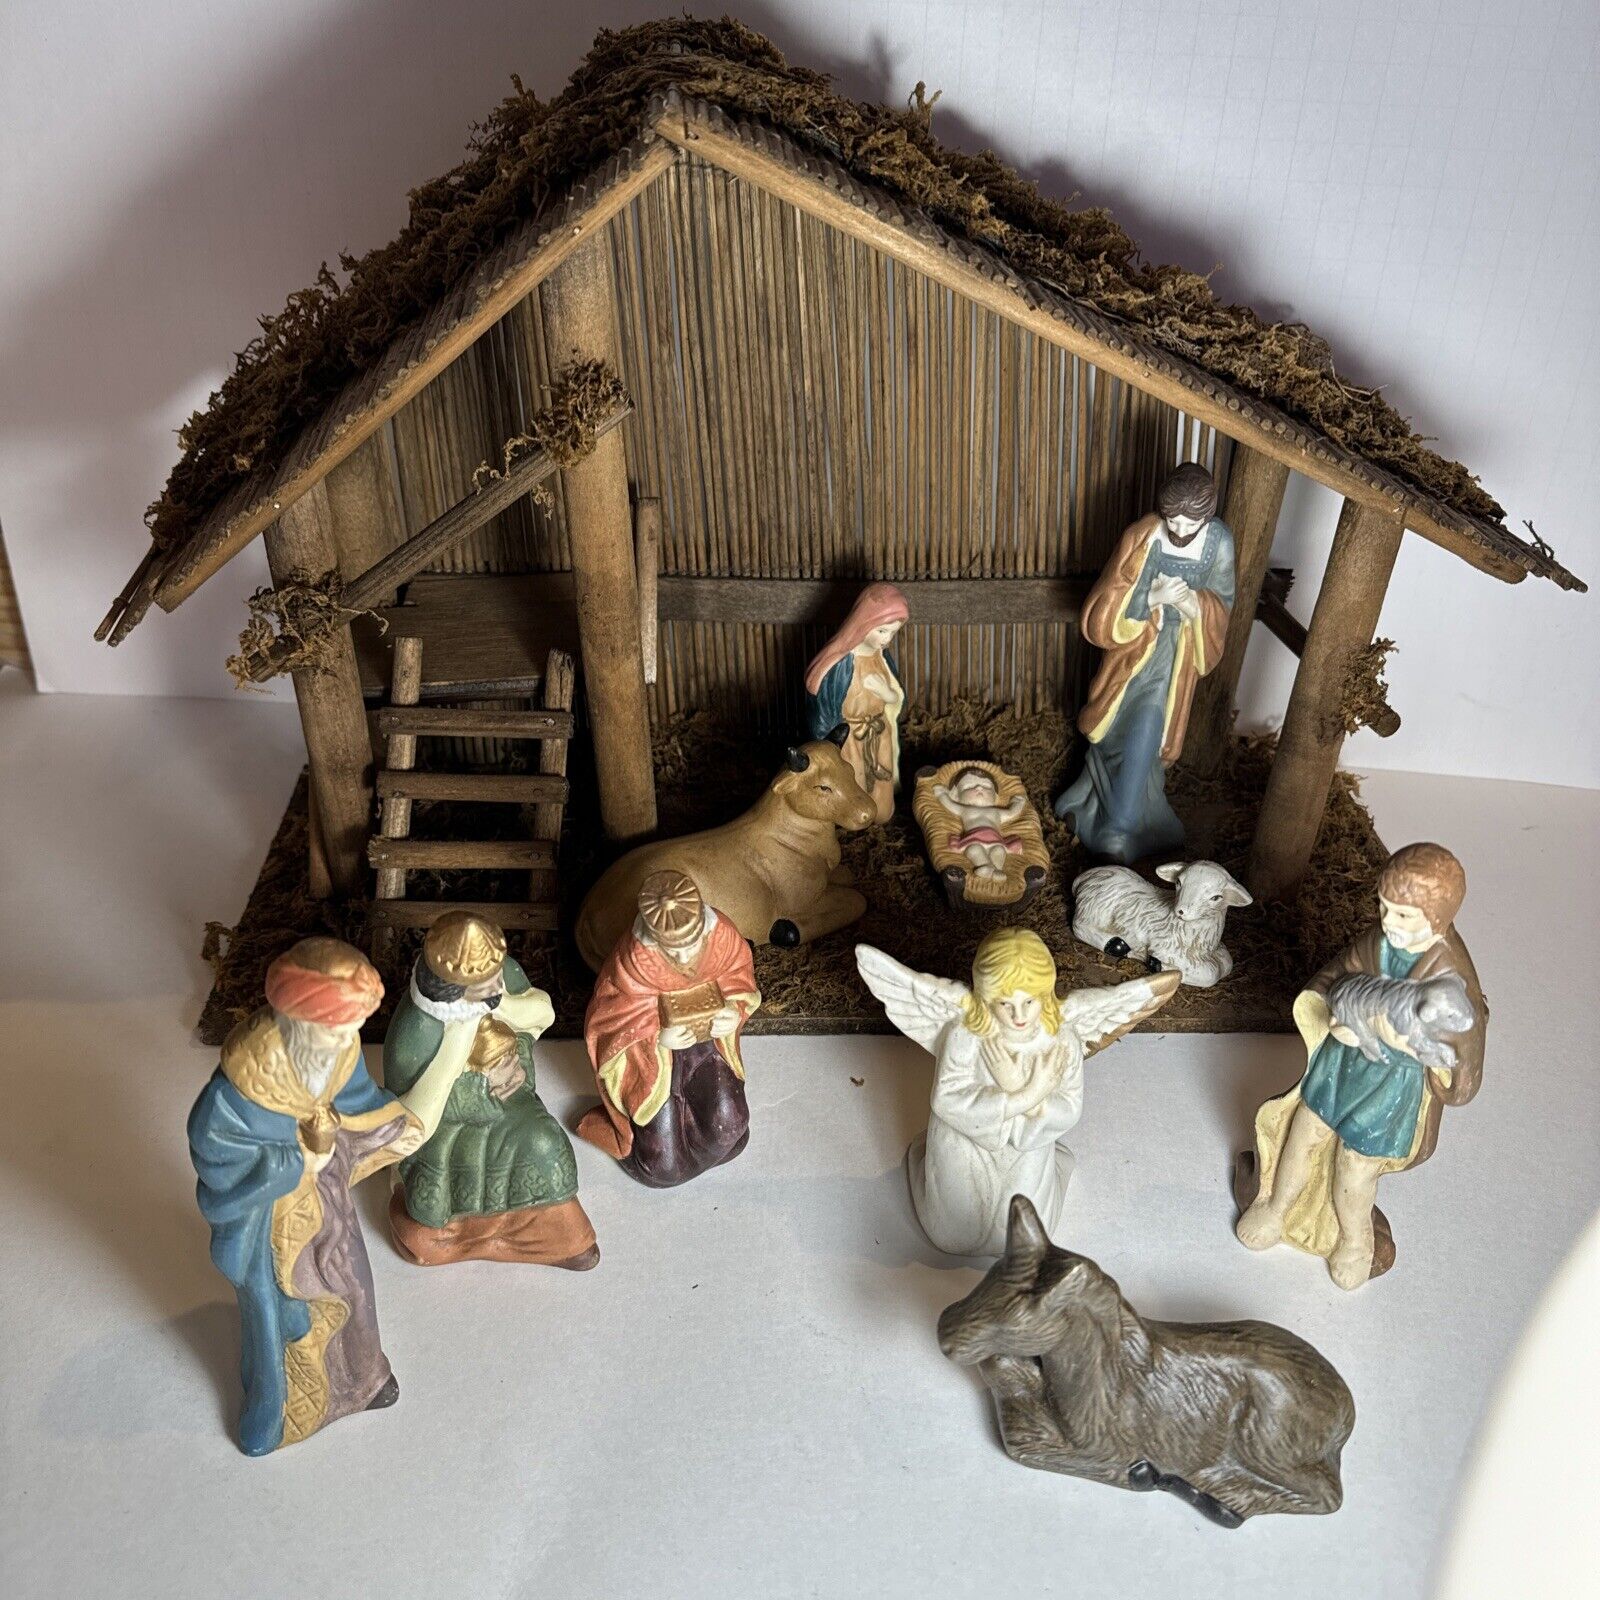 Vintage TRADITIONS 12 Piece Porcelain Nativity Set (Hand Painted) with Manger